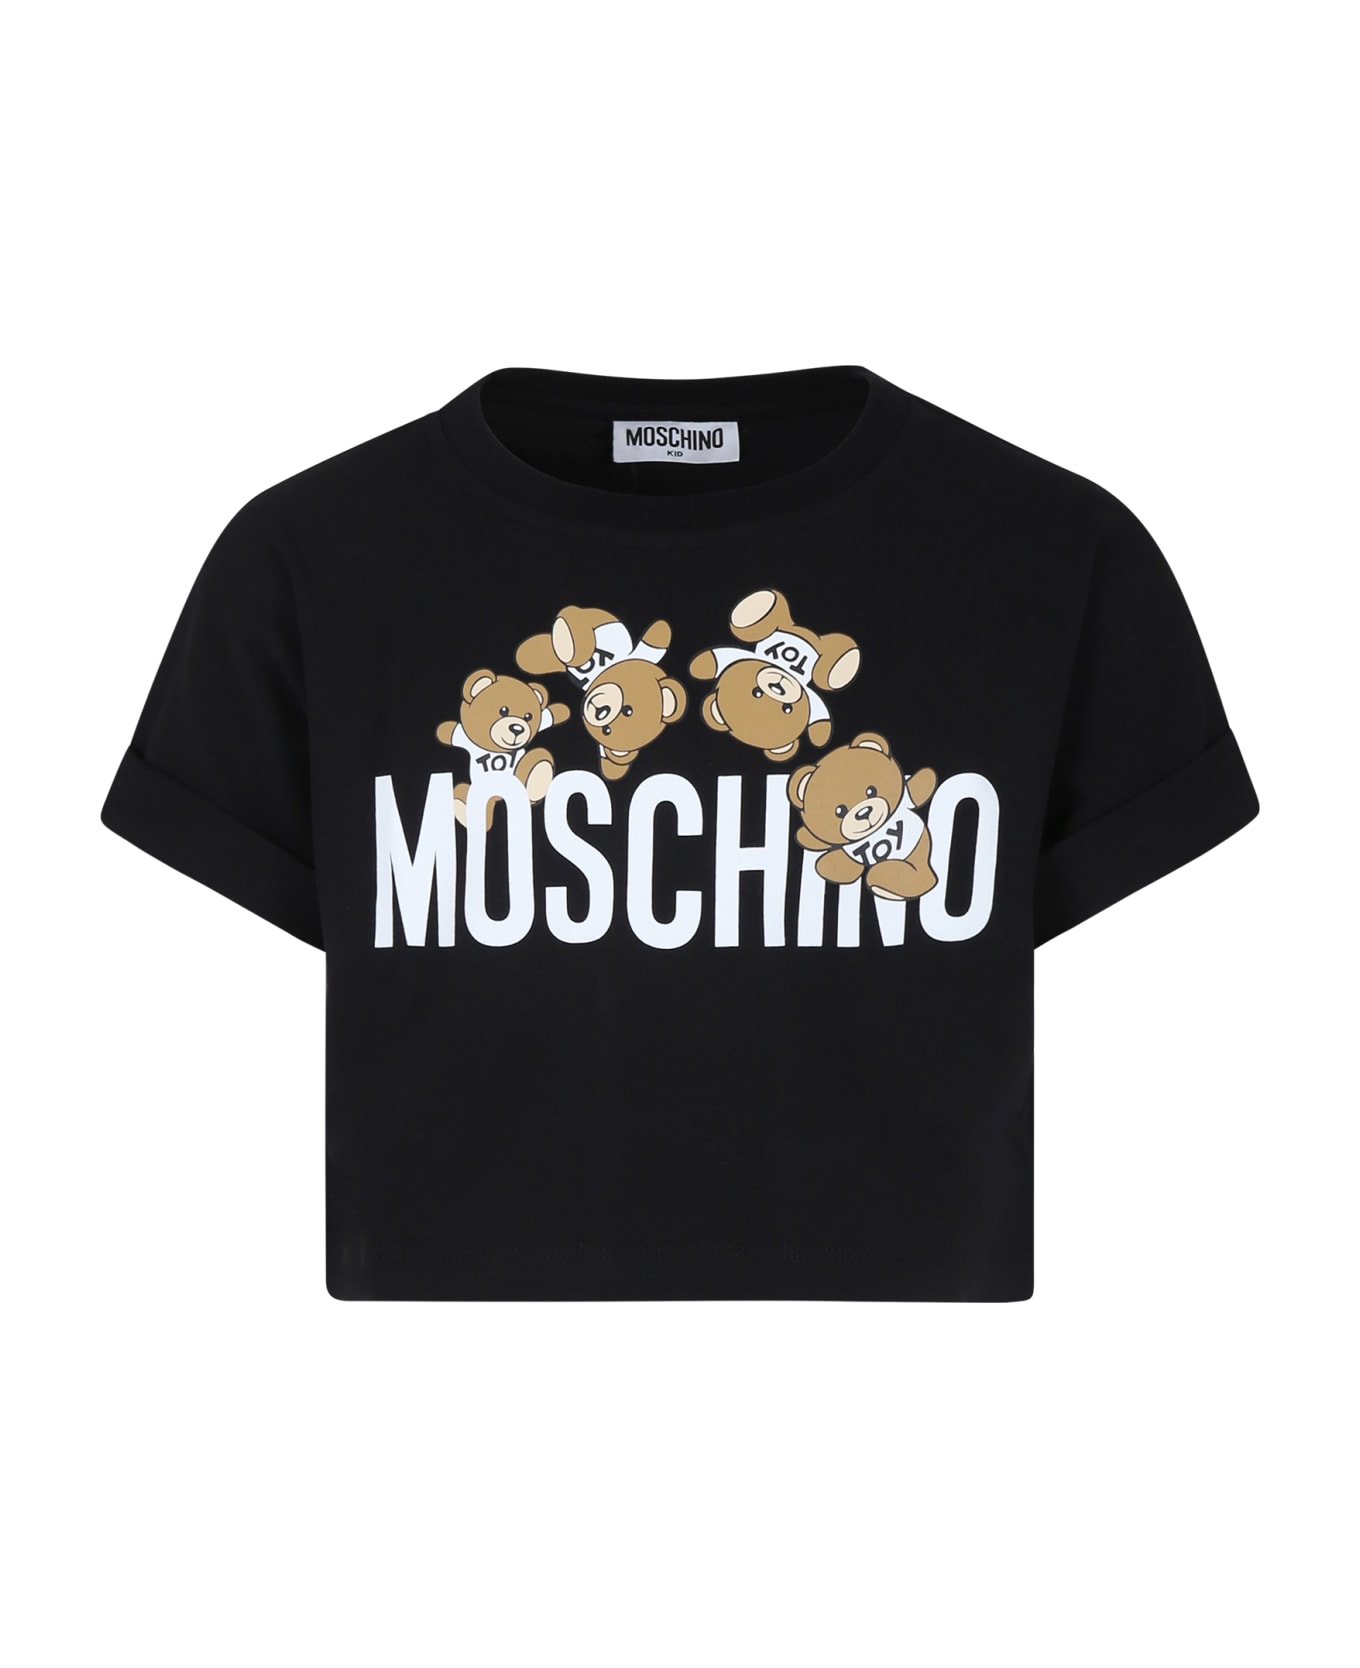 Moschino Black Crop T-shirt For Girl With Teddy Bears And Logo - Black